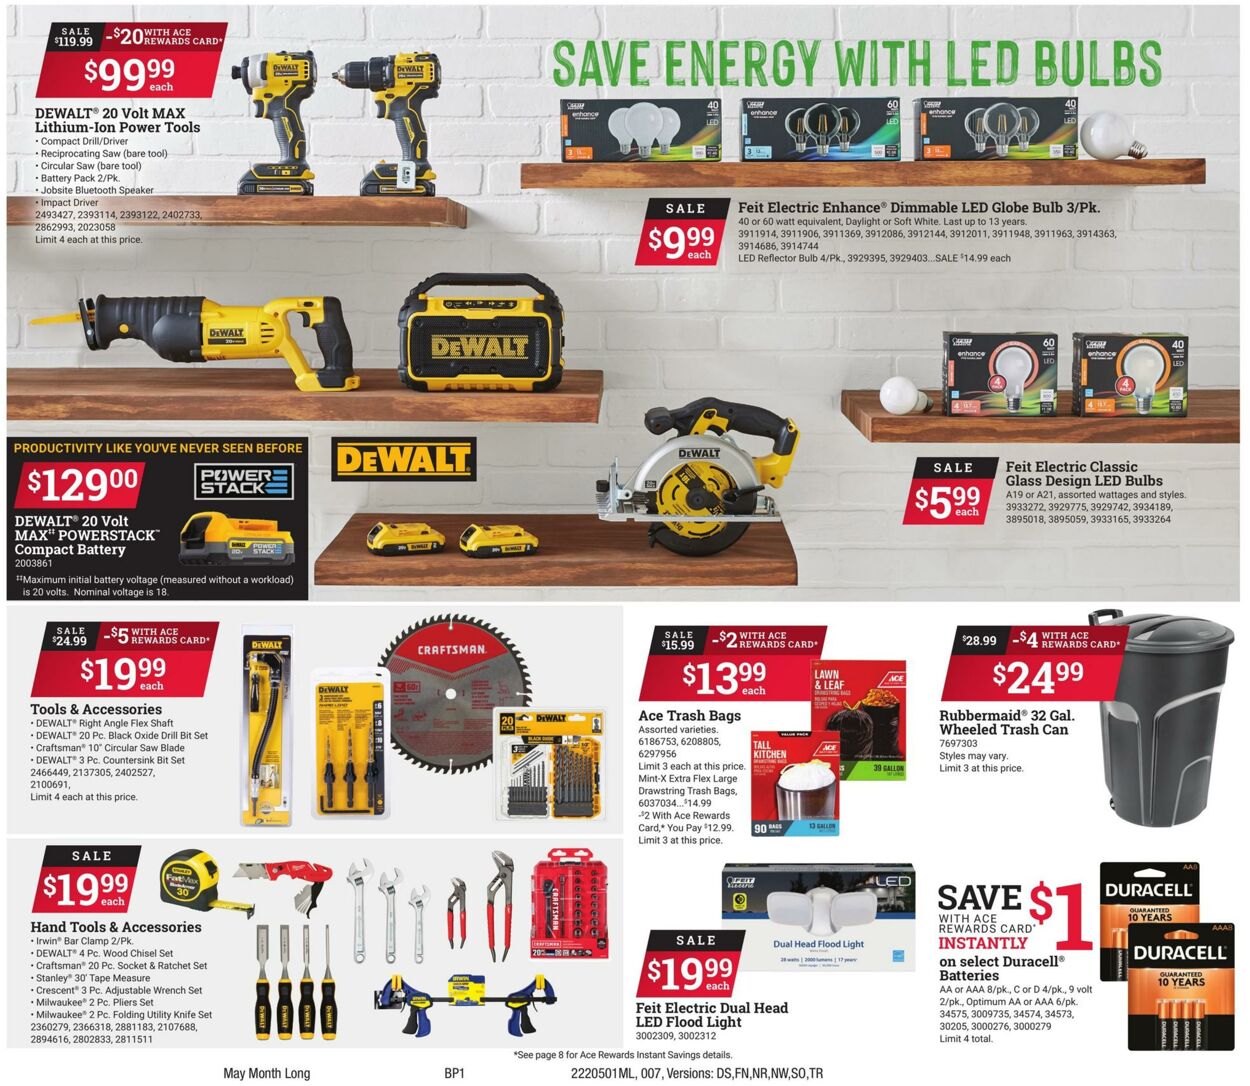 Weekly ad Ace Hardware 05/01/2022 - 05/31/2022